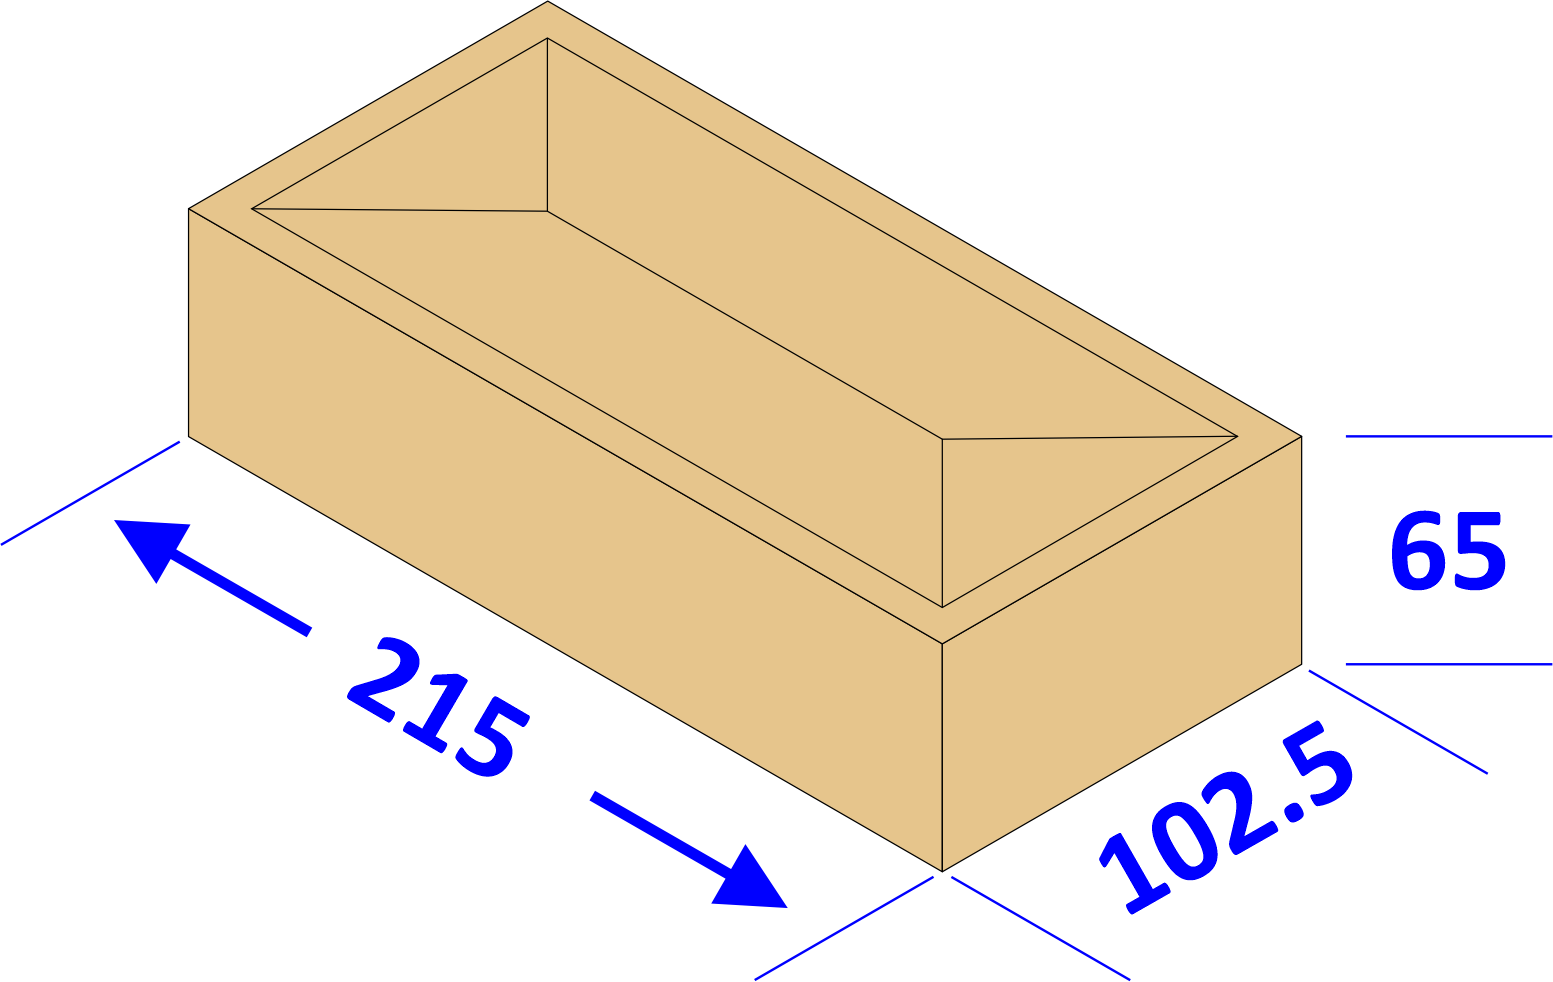 The exact dimensions of a lego brick